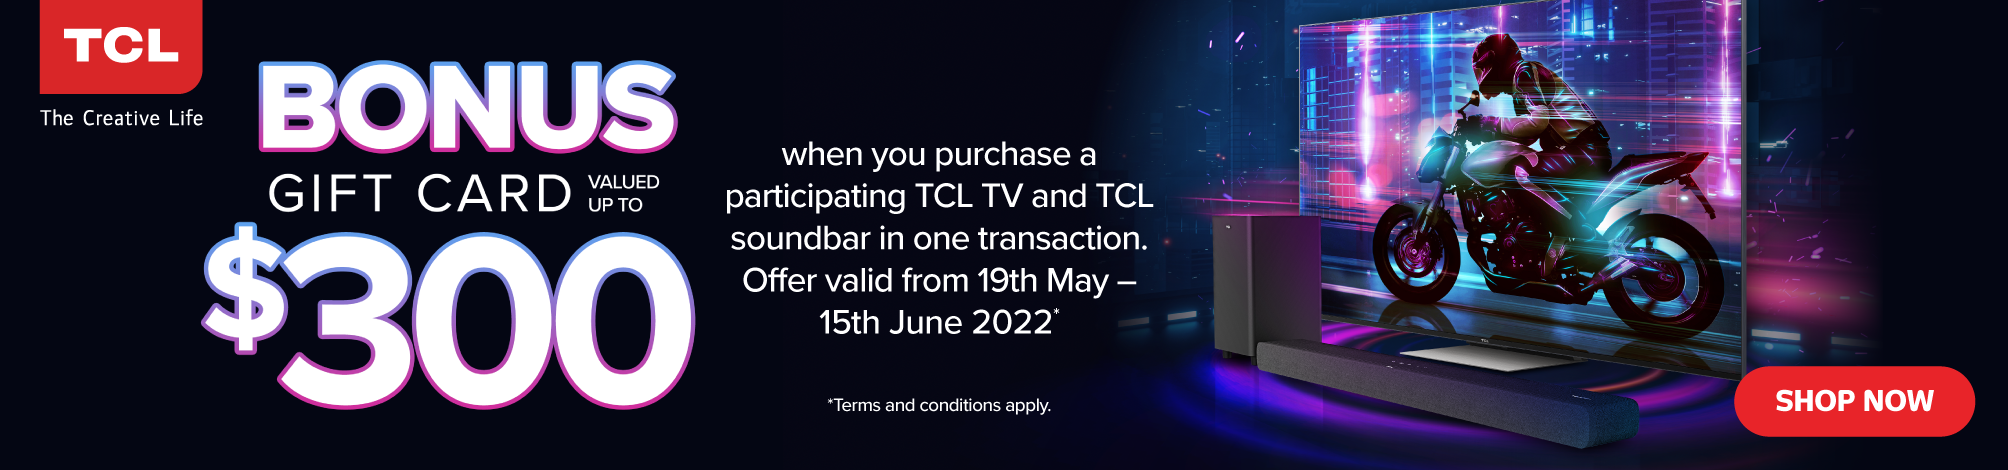 Bonus Gift Card With Selected TCL TV & Soundbar Packages